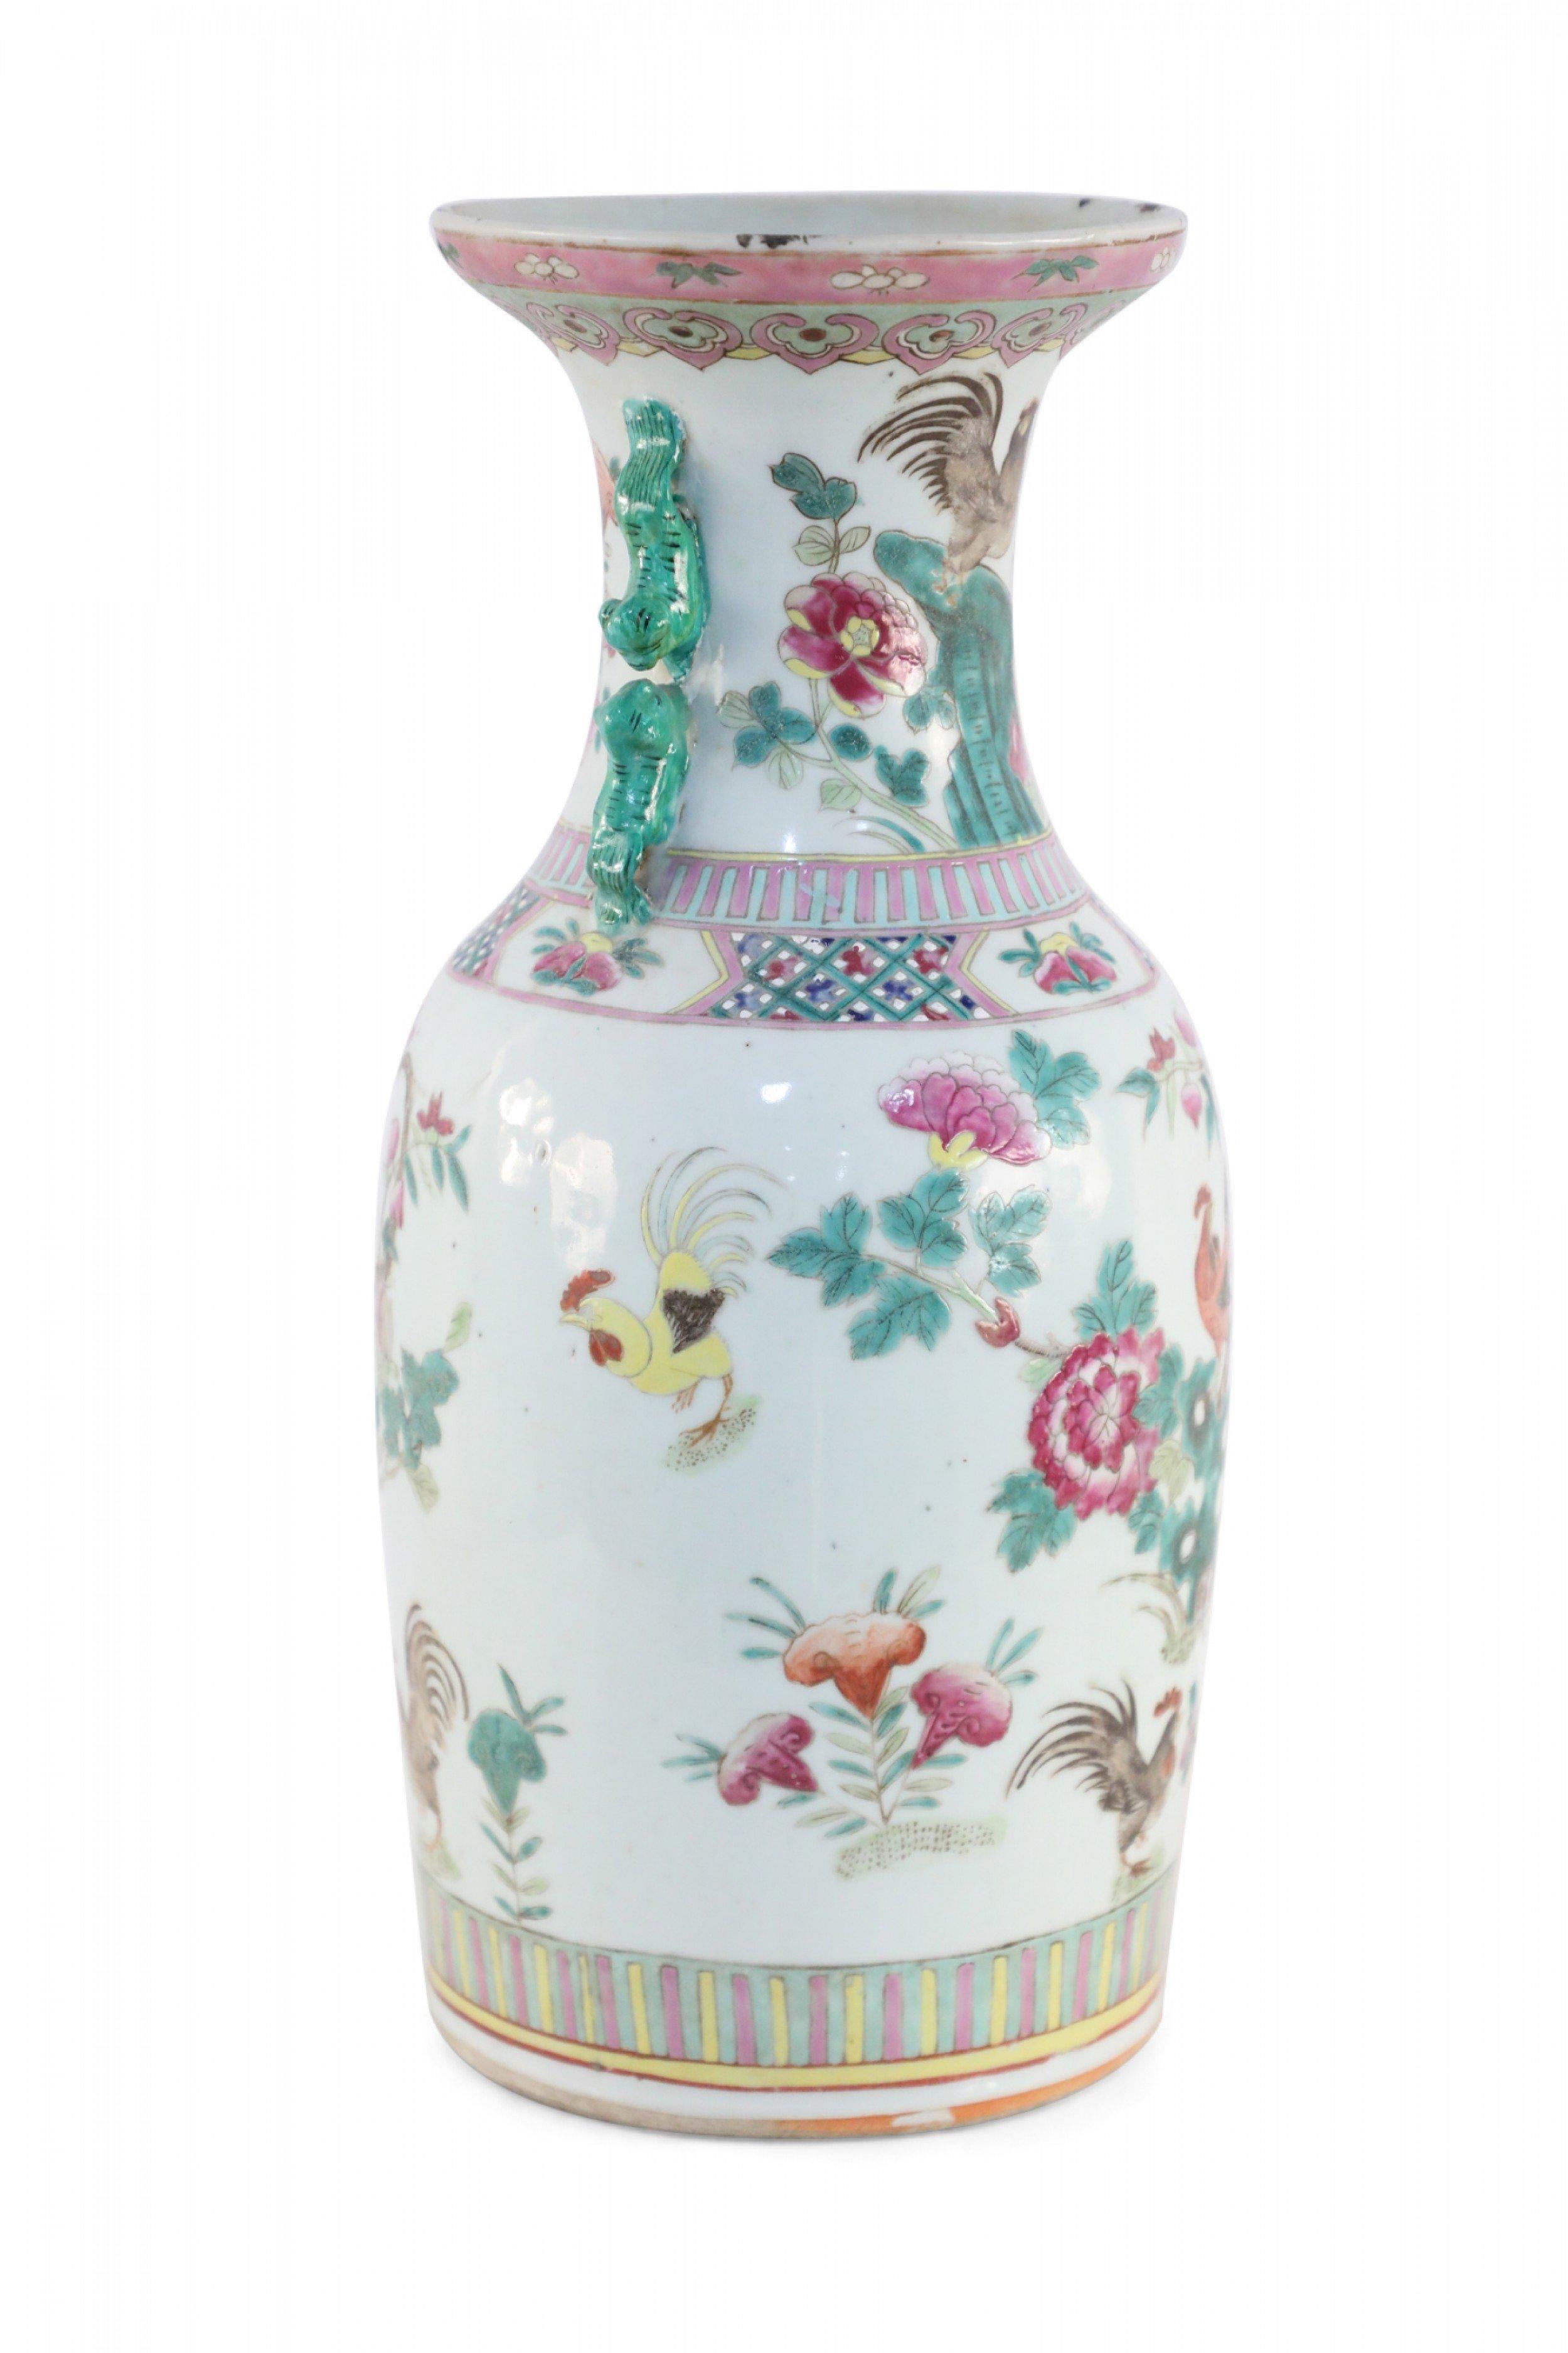 Chinese White, Green, and Pink Floral and Rooster Design Porcelain Urn For Sale 2